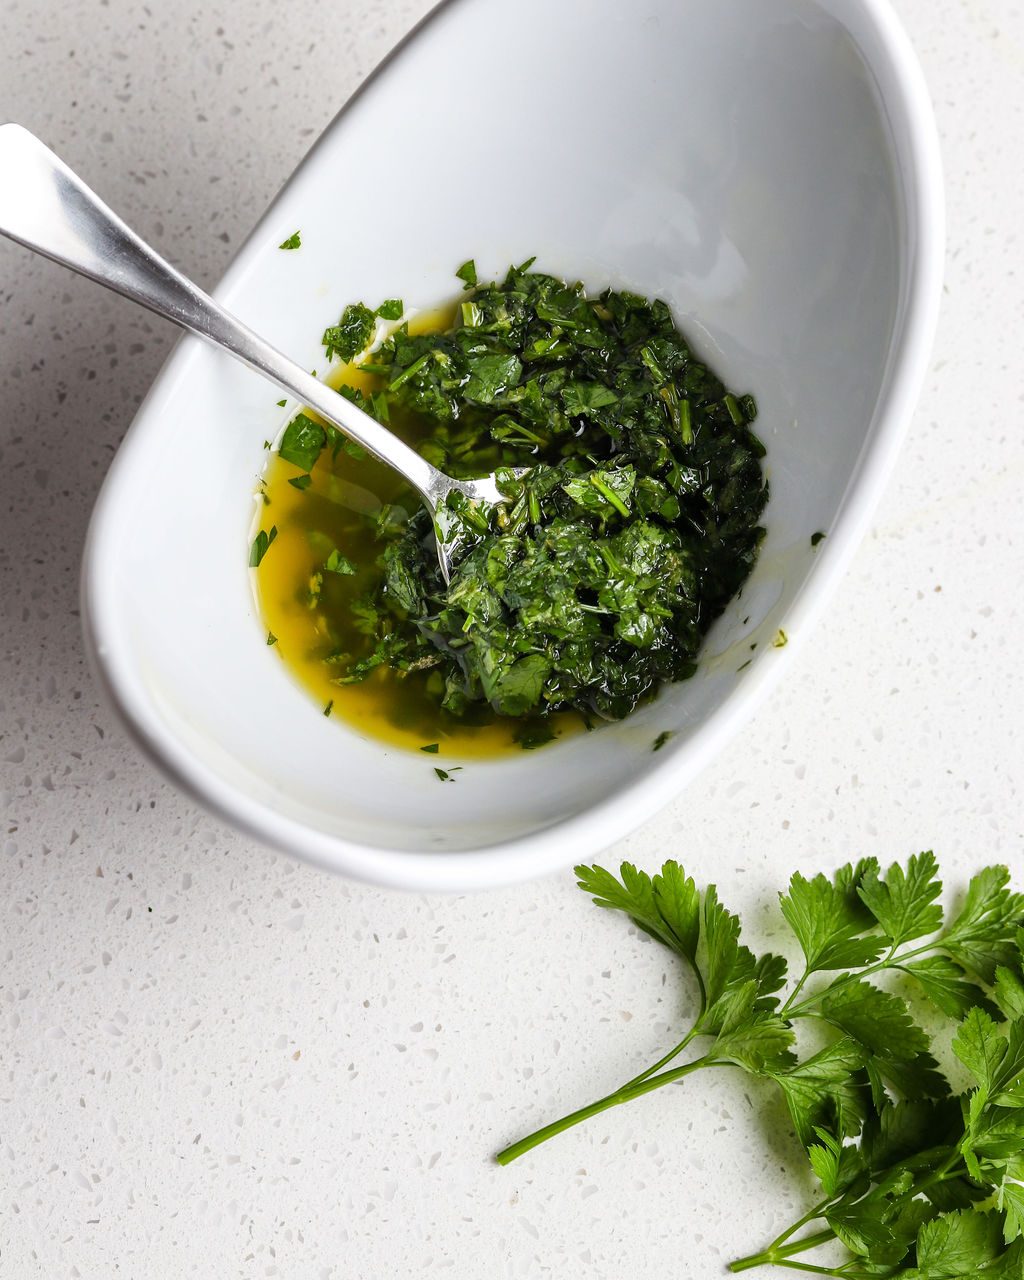 A white bowl holds a green gremolata sauce with chopped parsley, lemon juice, and salt and pepper. The bowl is sitting on a white surface. In the bottom righthand corner are some green parsley leaves.